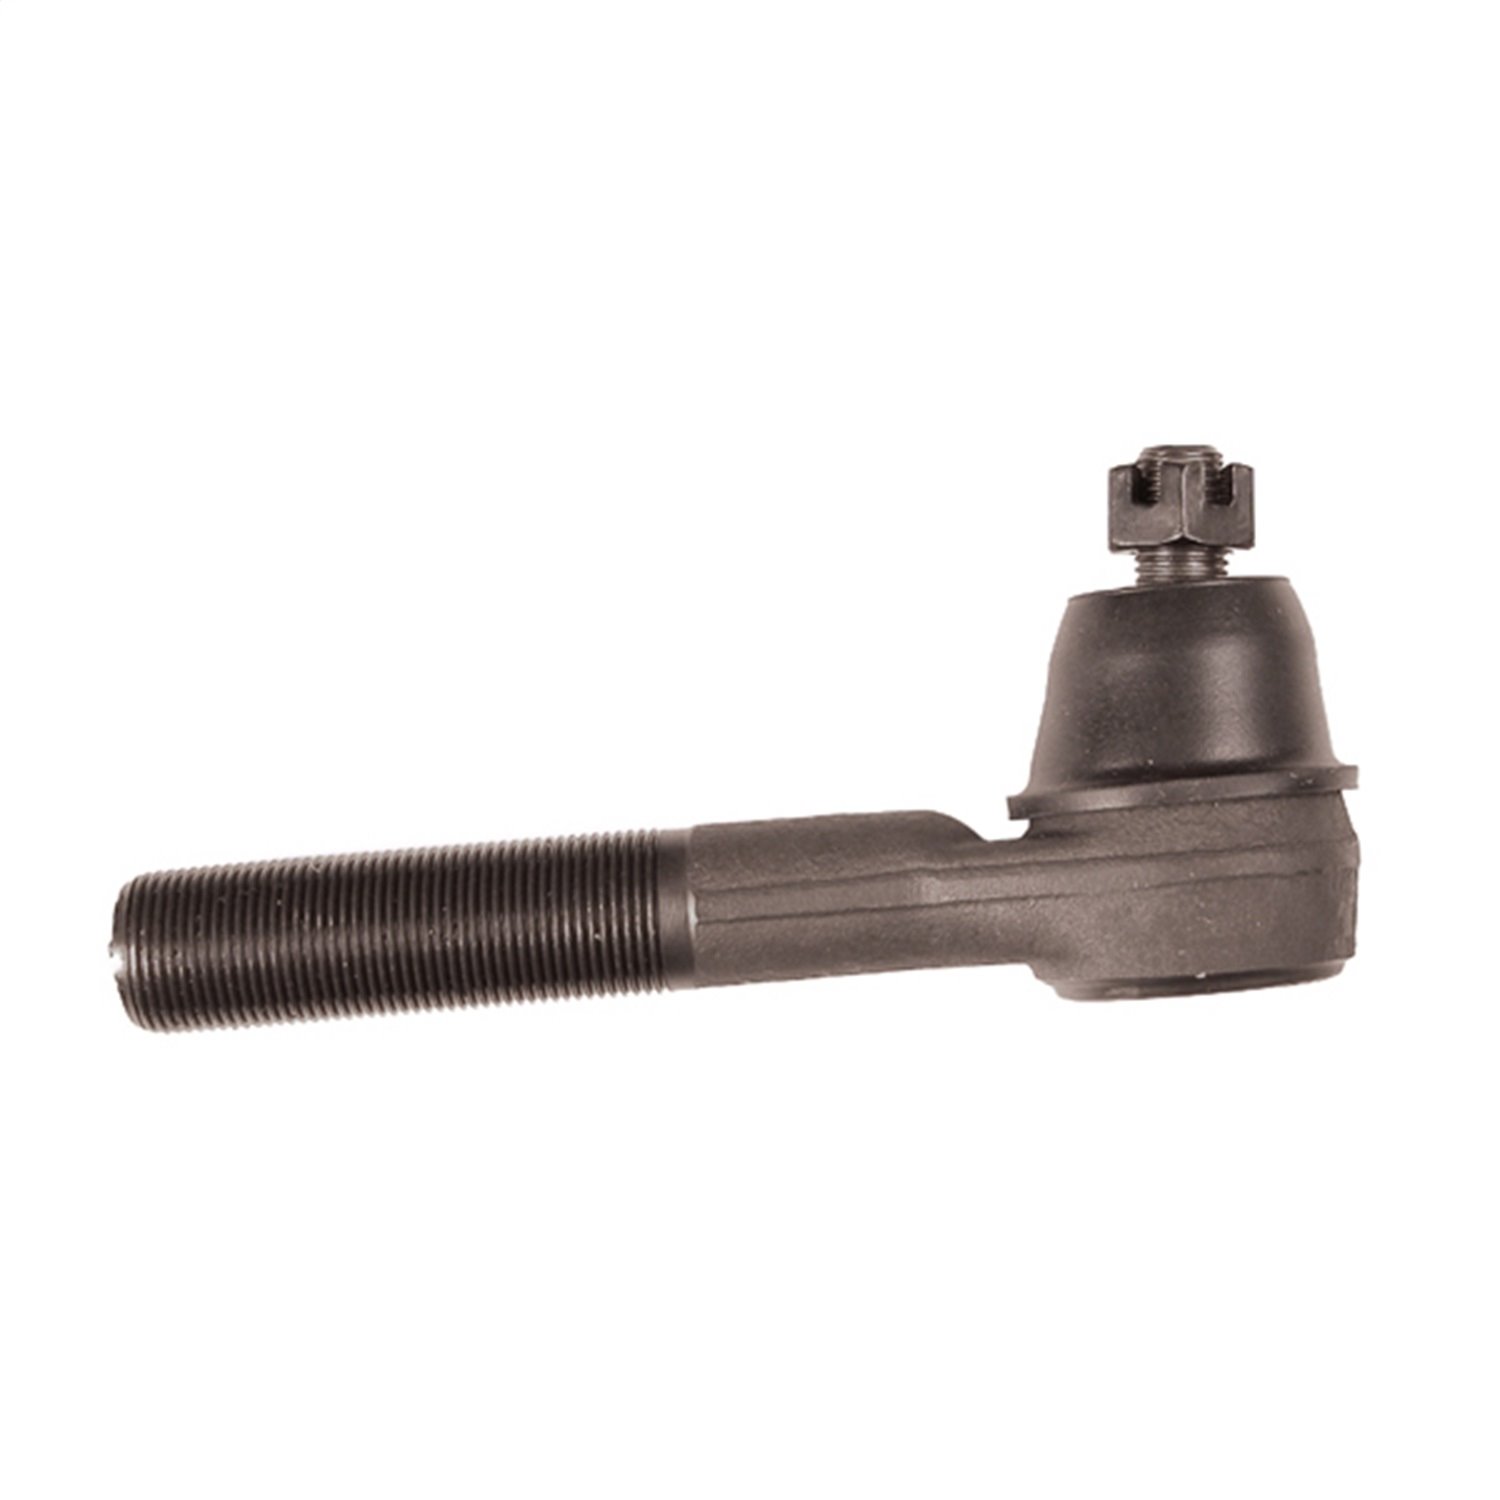 Replacement tie rod end from Omix-ADA, Fits 74-91 Jeep SJ Cherokees and Grand Wagoneers.